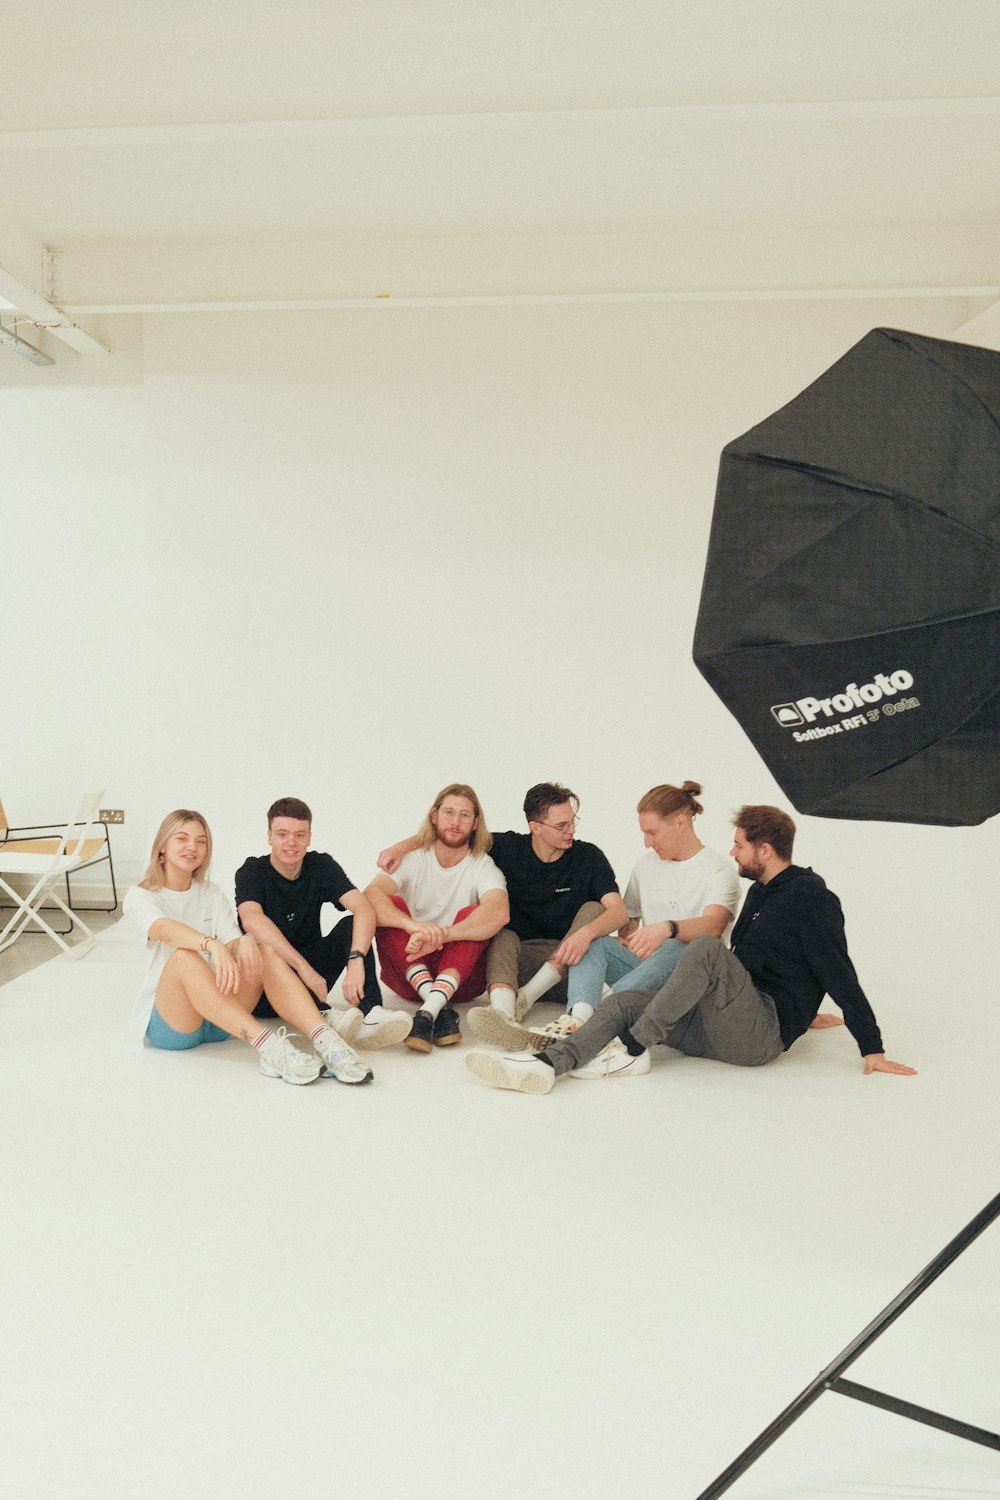 a group of people sitting in a room with a black umbrella